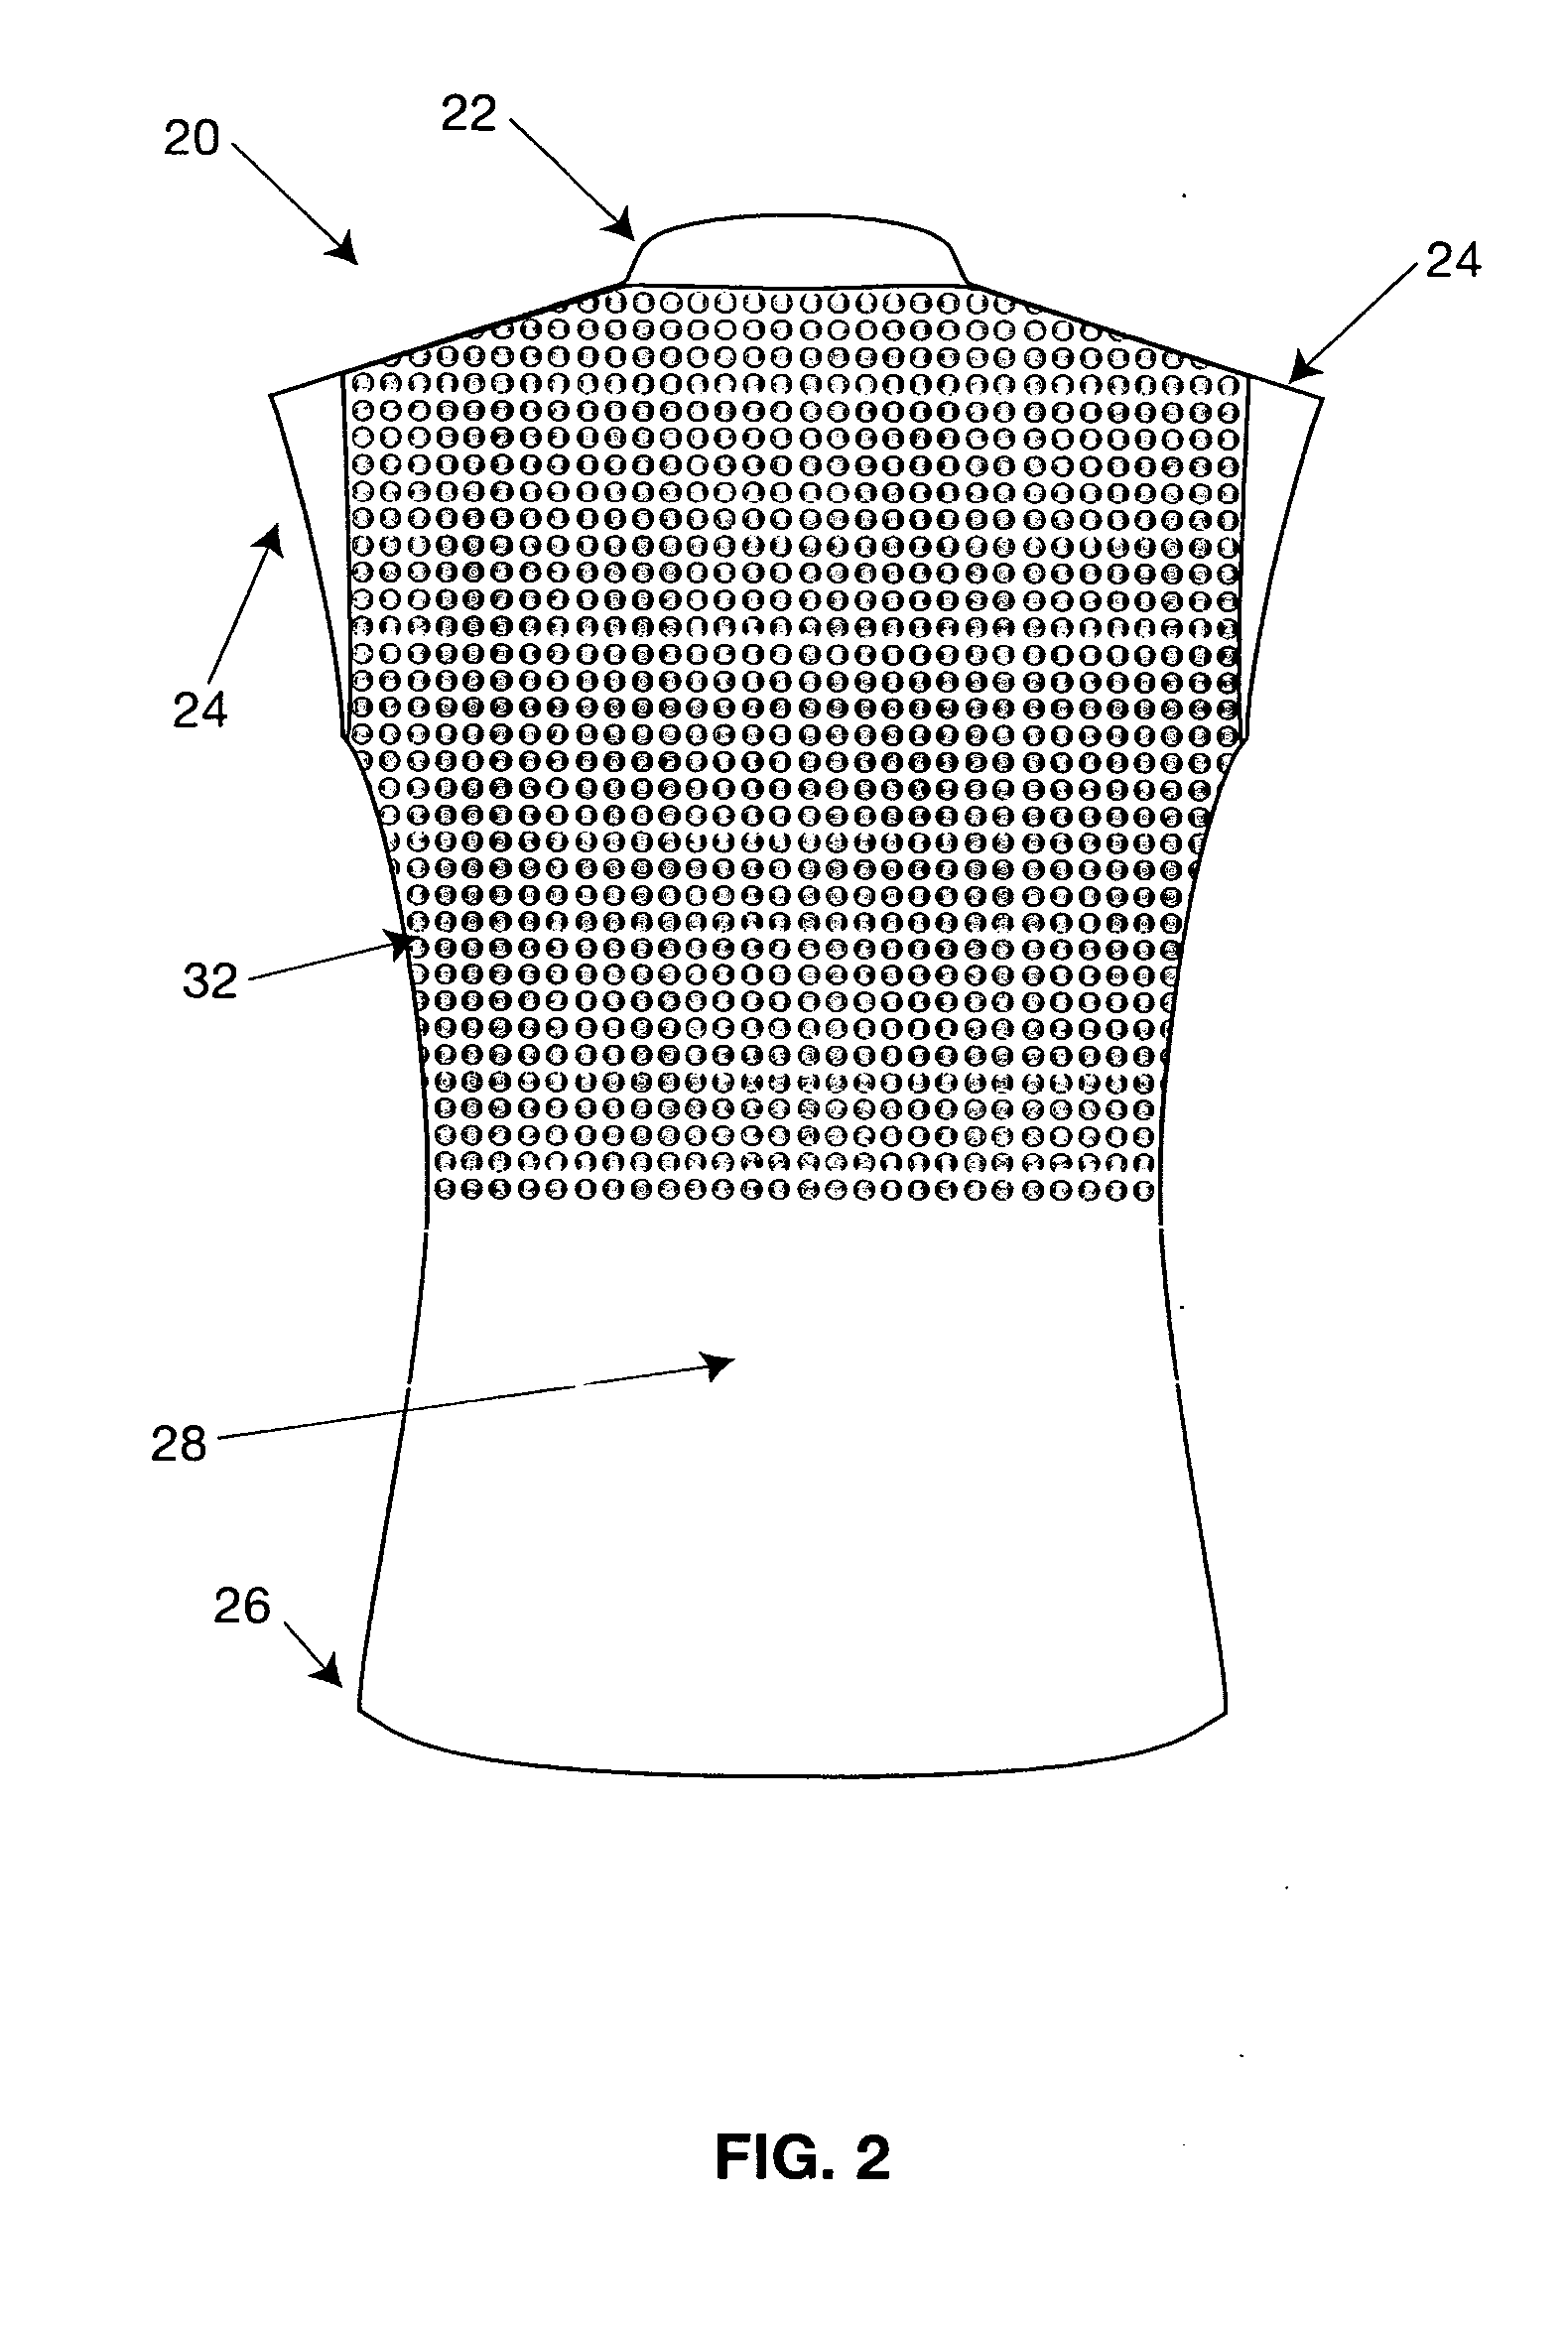 3-D fabric knitted stretch spacer material having molded domed patterns and method of making